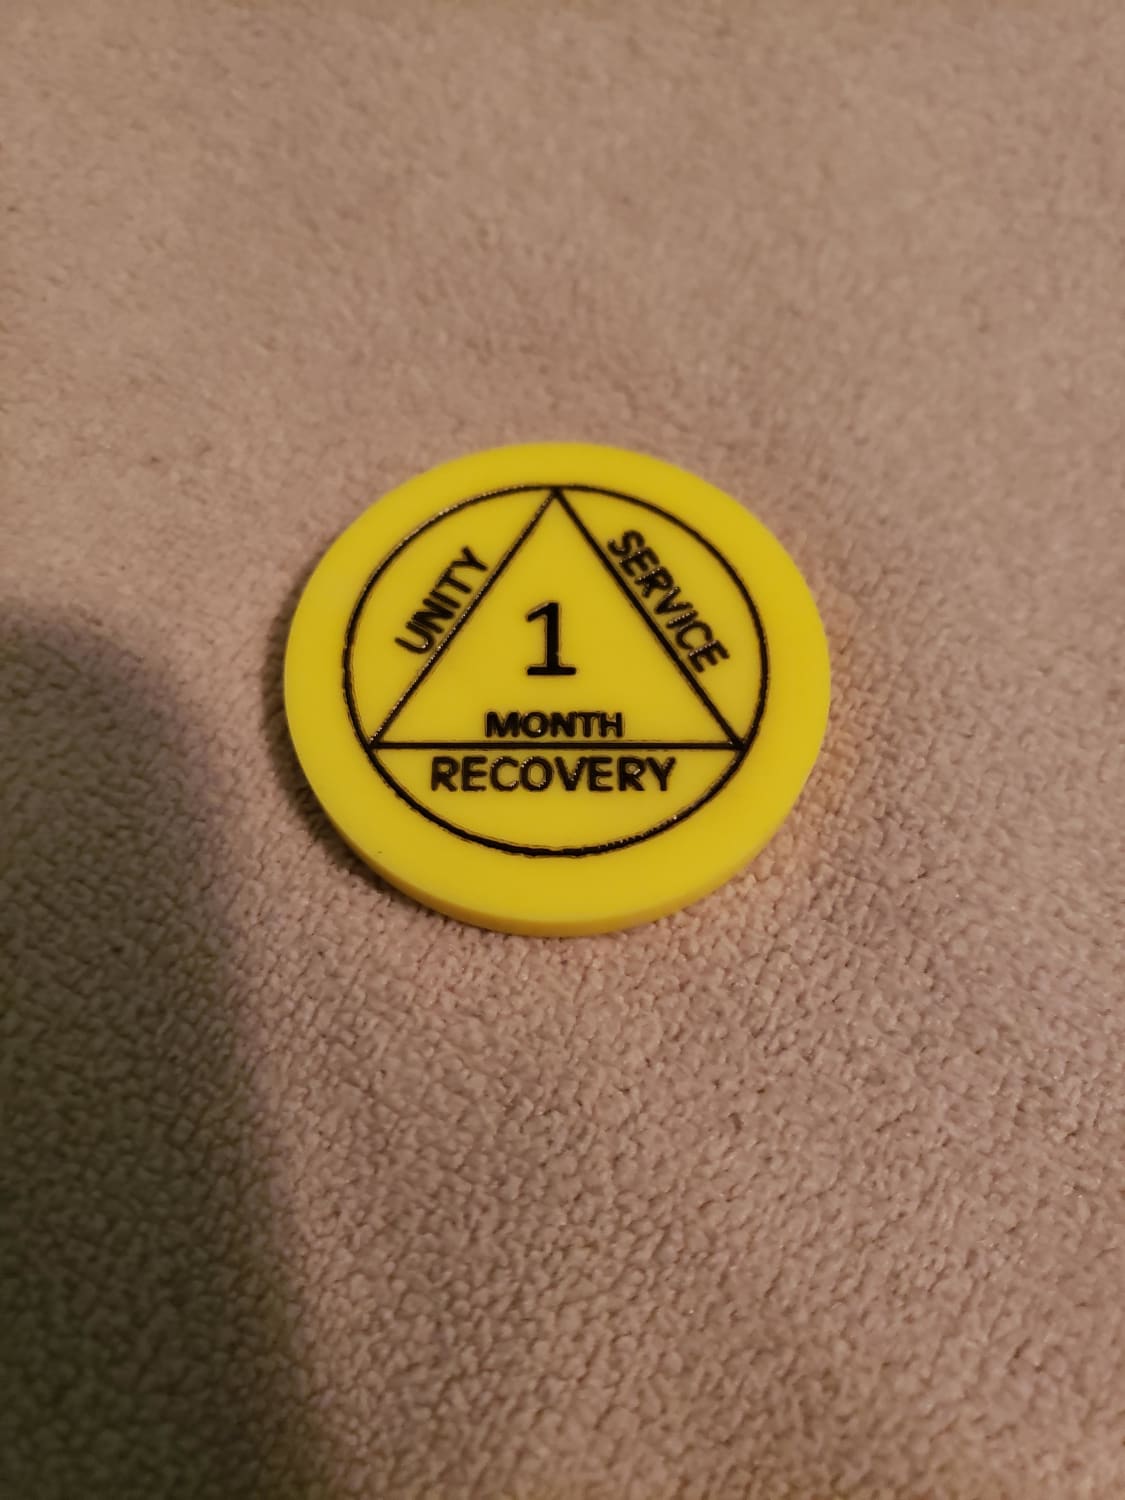 I just wanted to share this picture of my chip signifying 30 days clean from alcohol. I'm very proud of it, and I would not have it without the grace of our Father in heaven through our Lord Jesus Christ